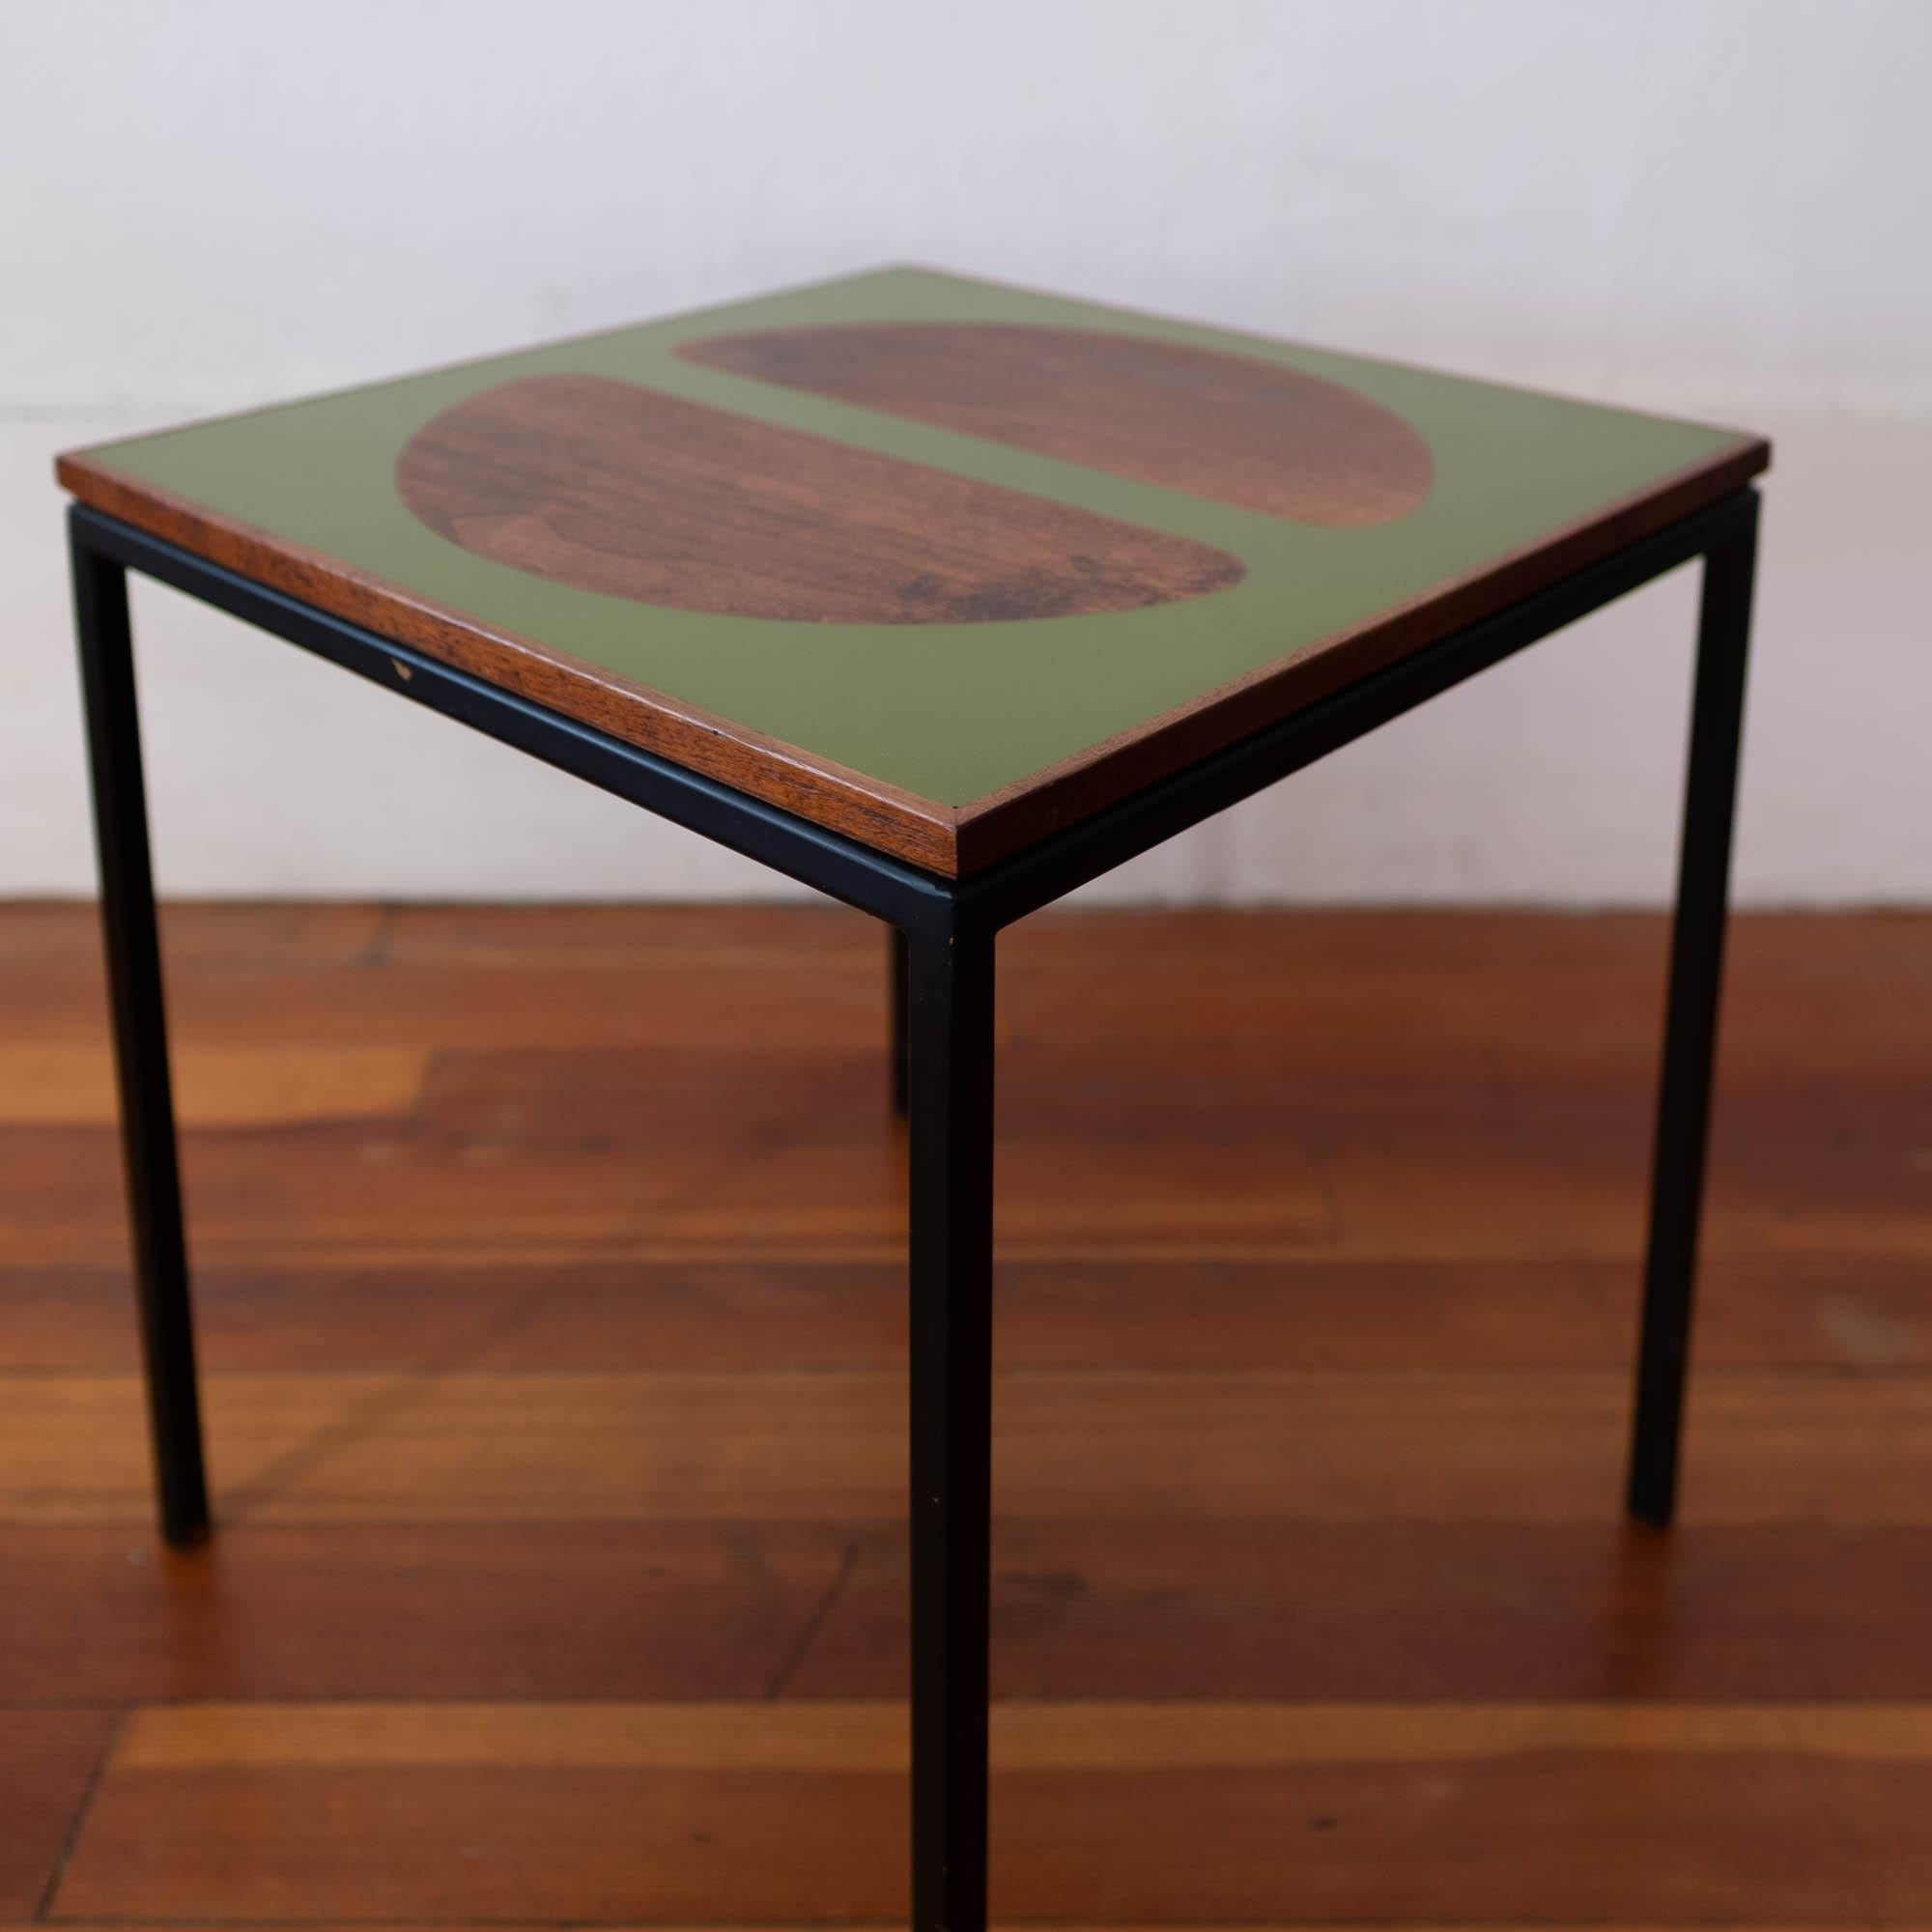 Peter Pepper Products occasional table designed by Howard McNab and Don Savage. Inlaid plastic and walnut on a steel frame. Palos Verdes Estates, California, 1960s.

Literature: California Design Eight (Pasadena Museum of Art) and California